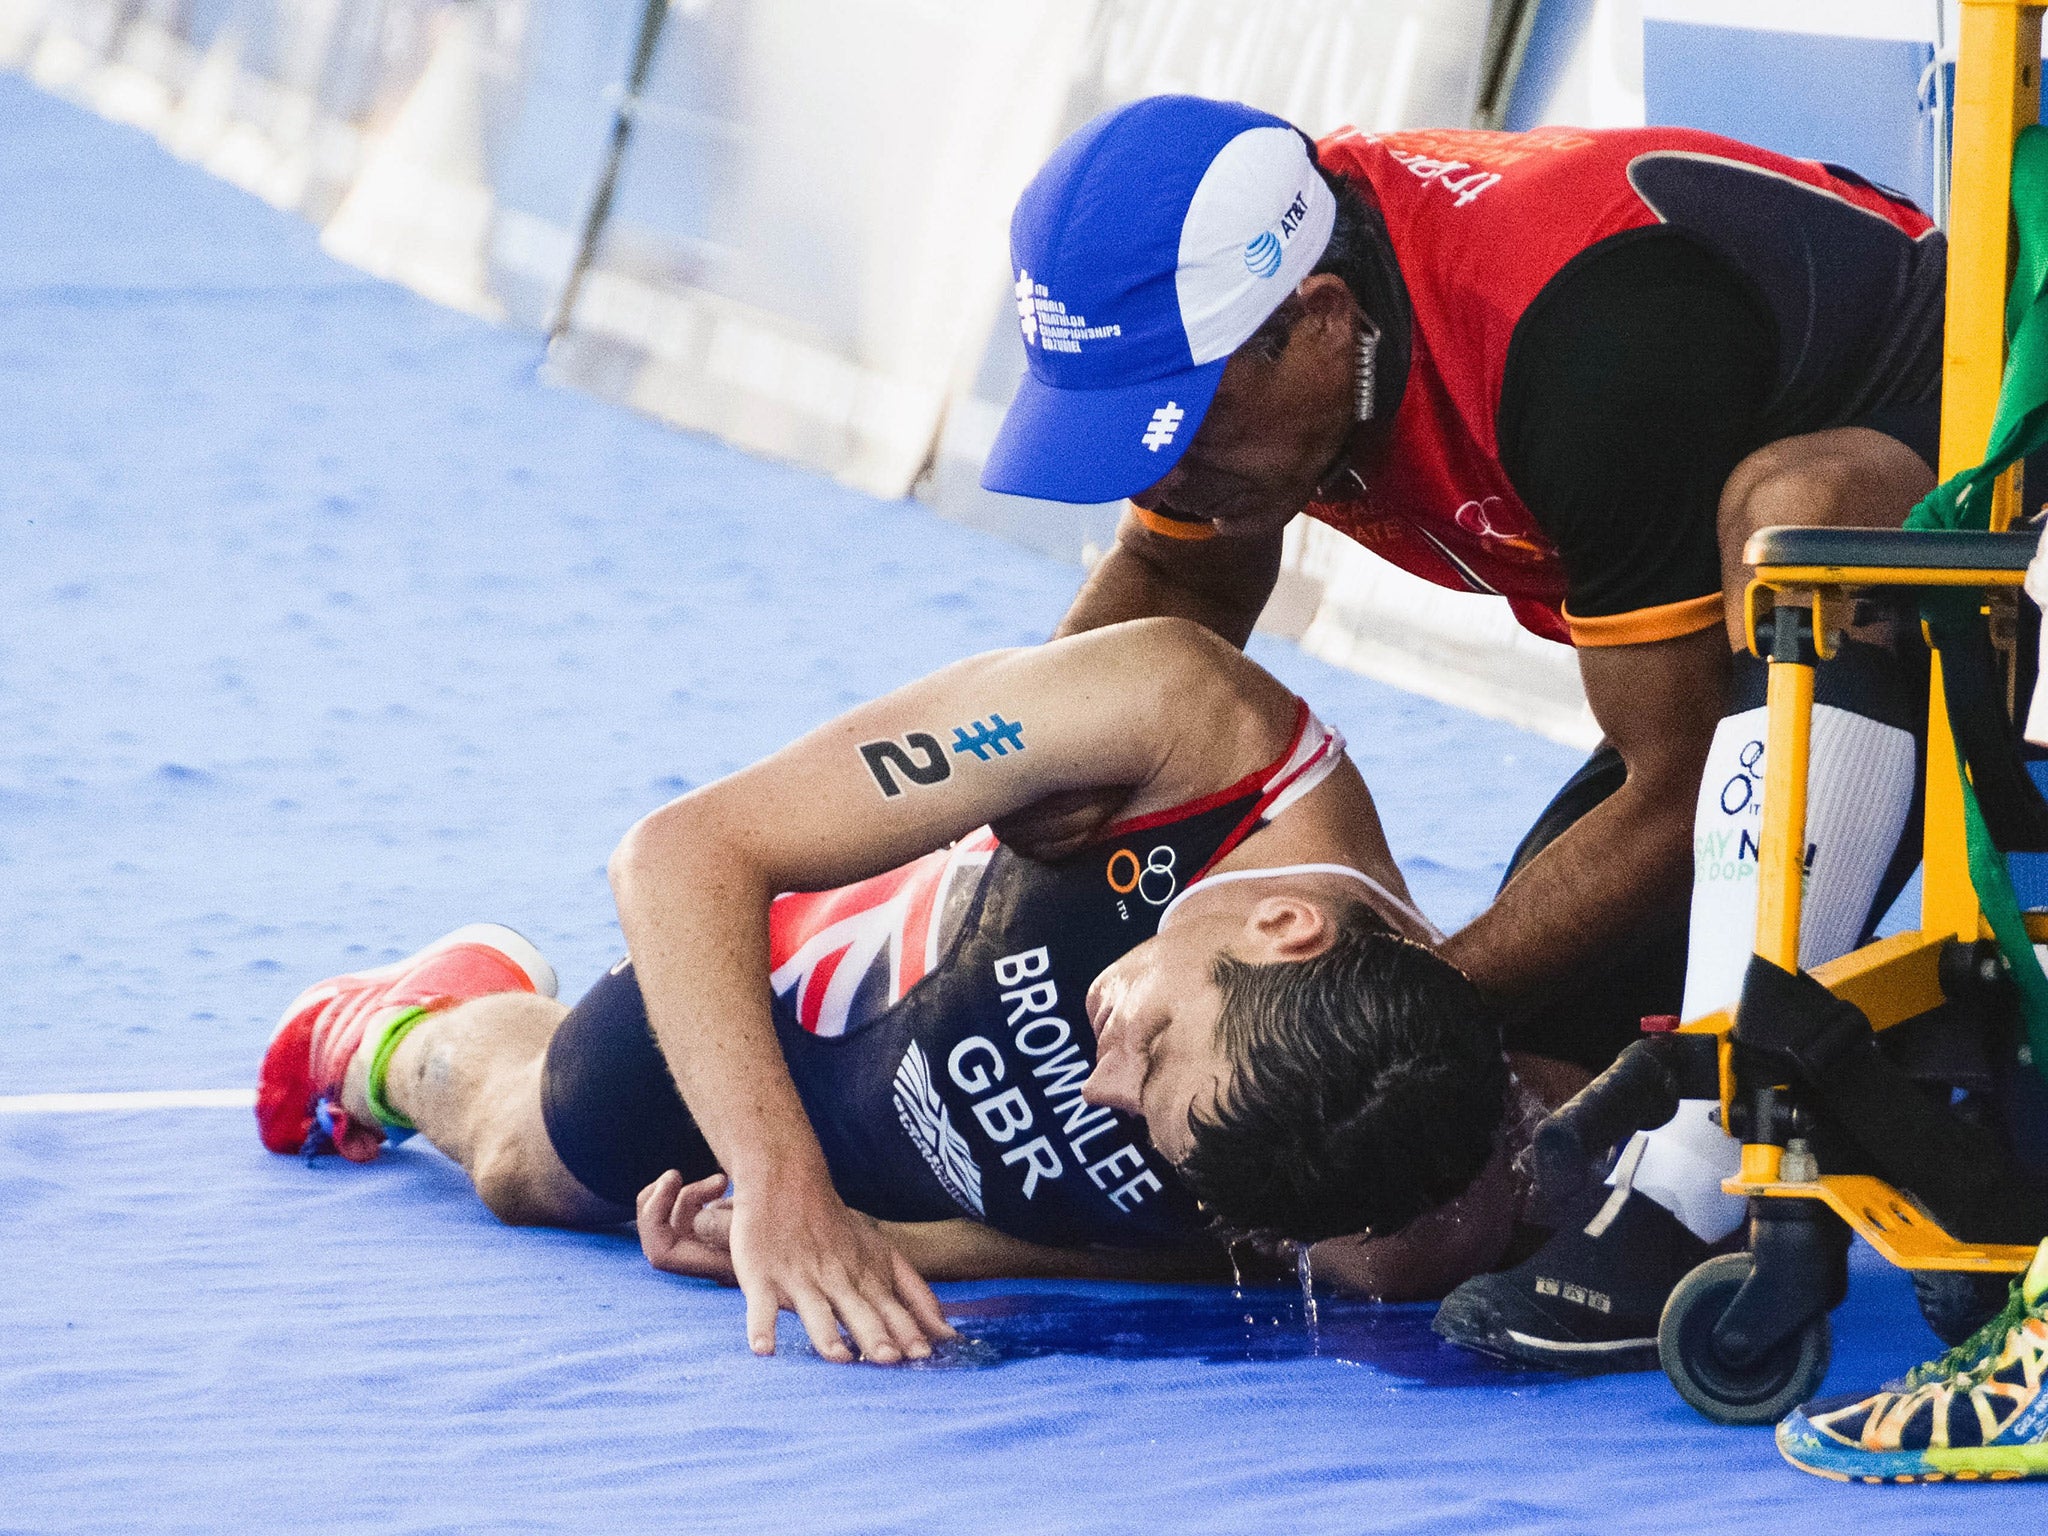 Brownlee needed medical attention immediately after the race